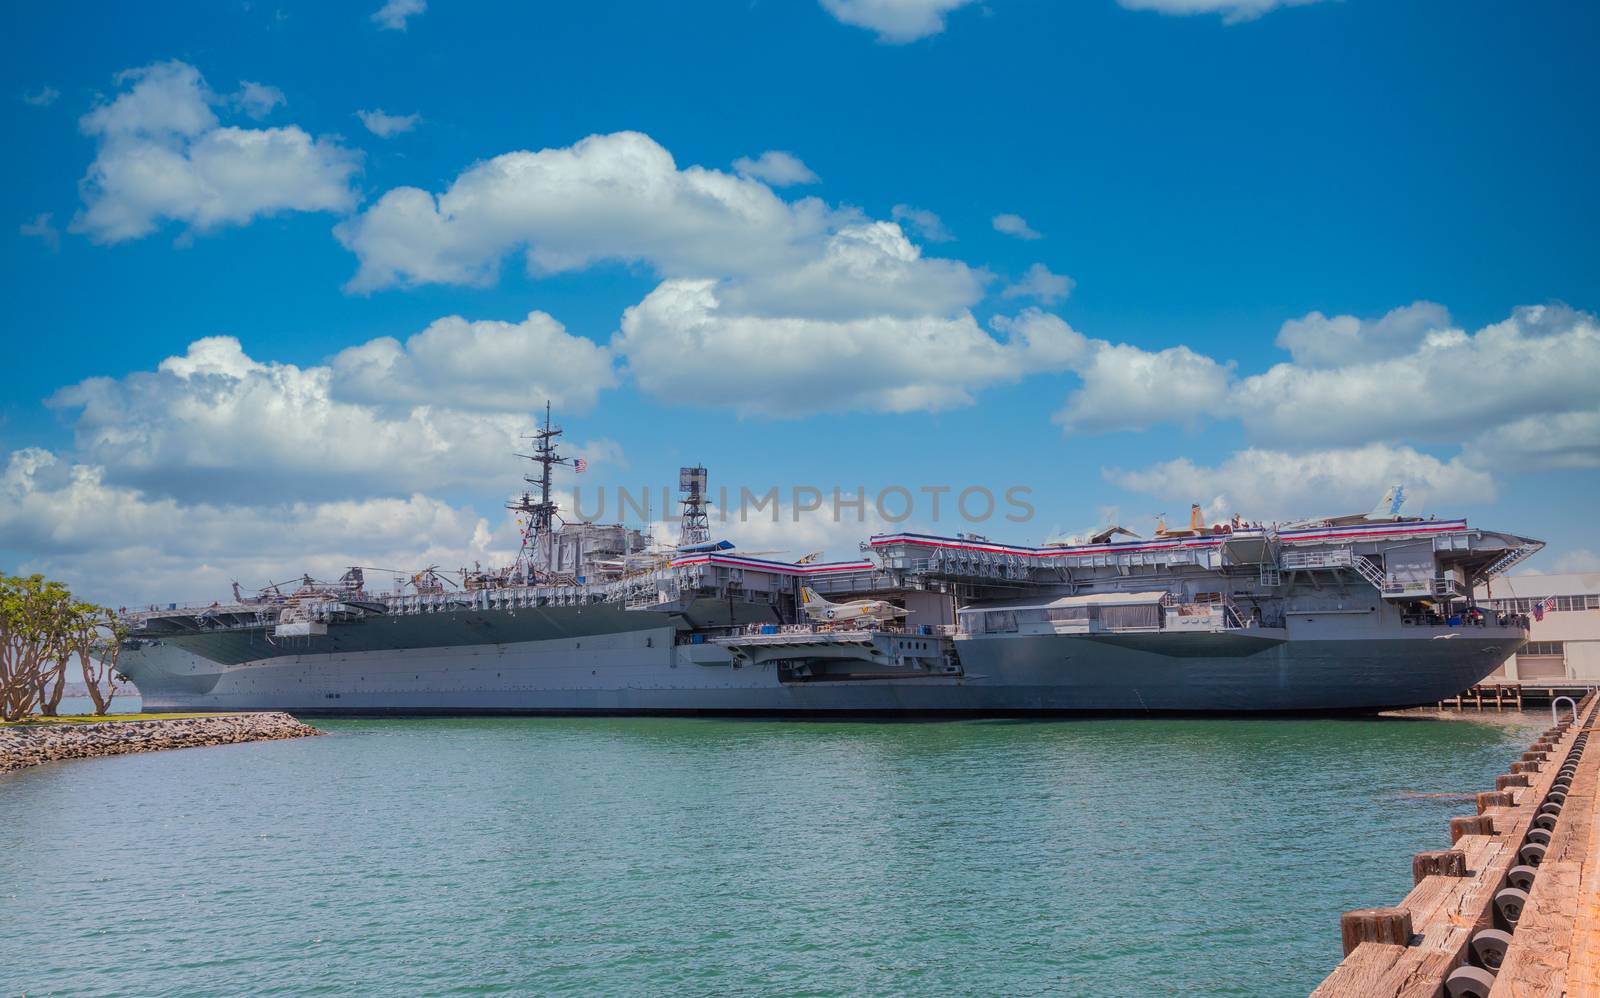 Midway Aircraft Carrier in San Diego by dbvirago